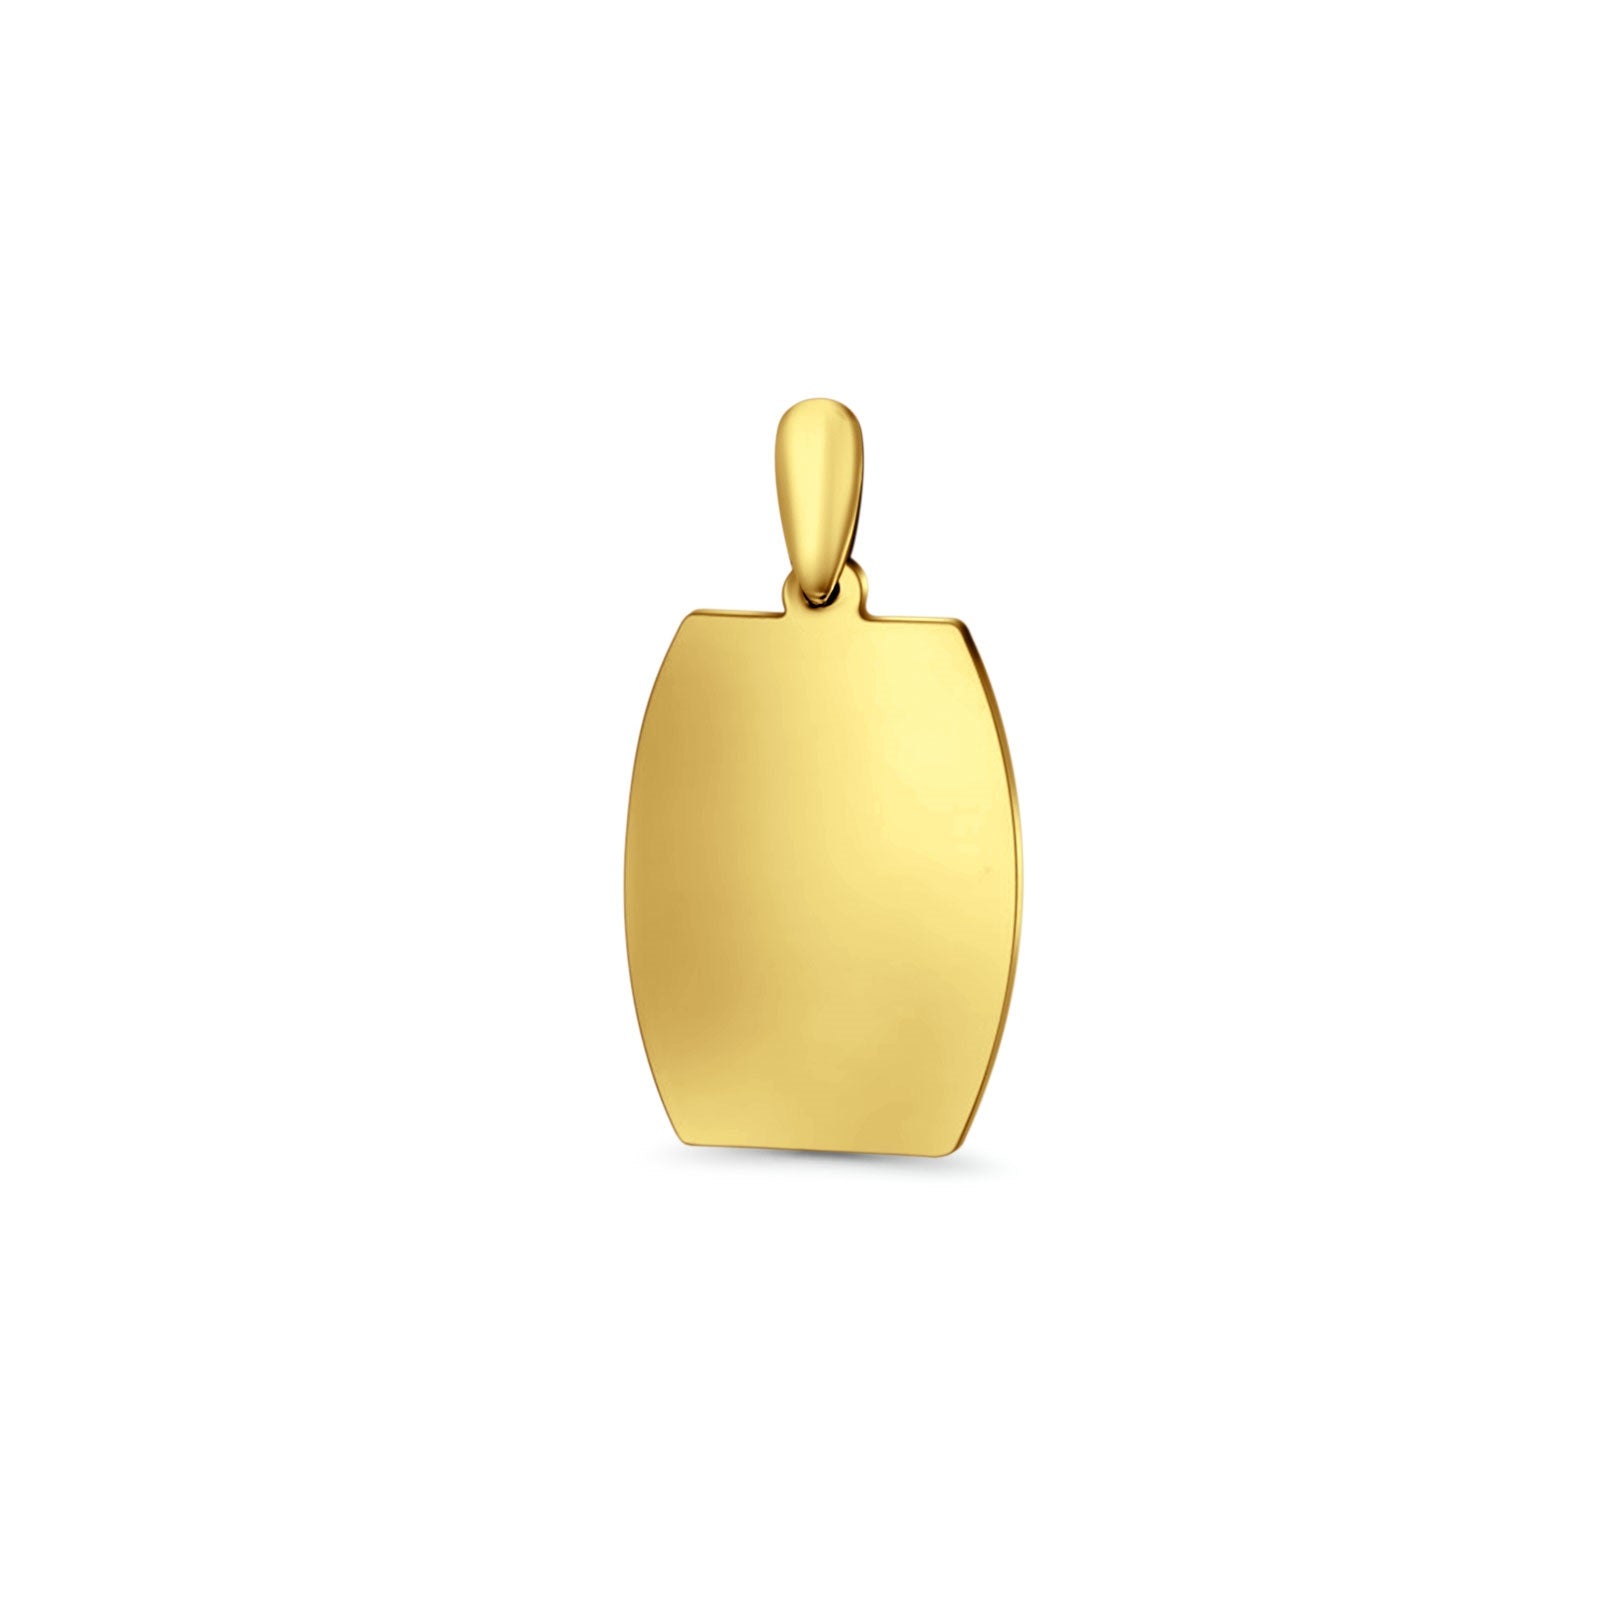 14K Yellow Gold Engravable Oval-Square Pendant 26mmX14mm With 16 Inch To 24 Inch 0.8MM Width Square Wheat Chain Necklace